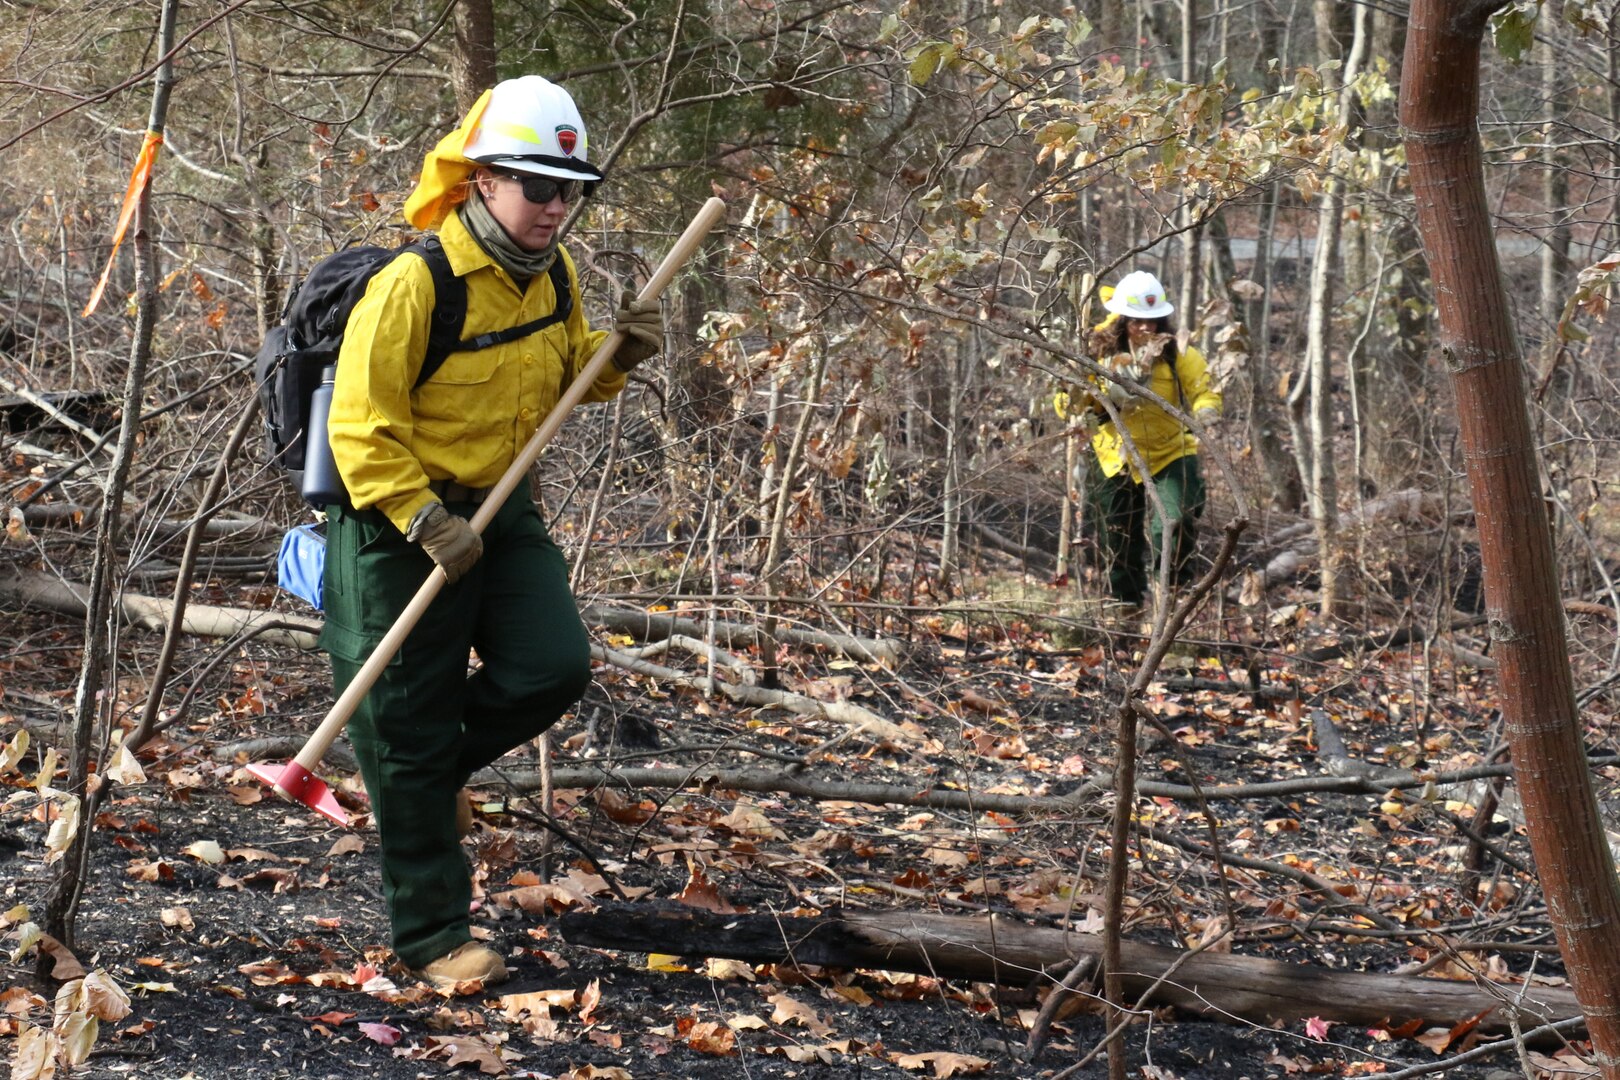 VNG deploys ground crews to Madison County, ends aerial fire suppression missions